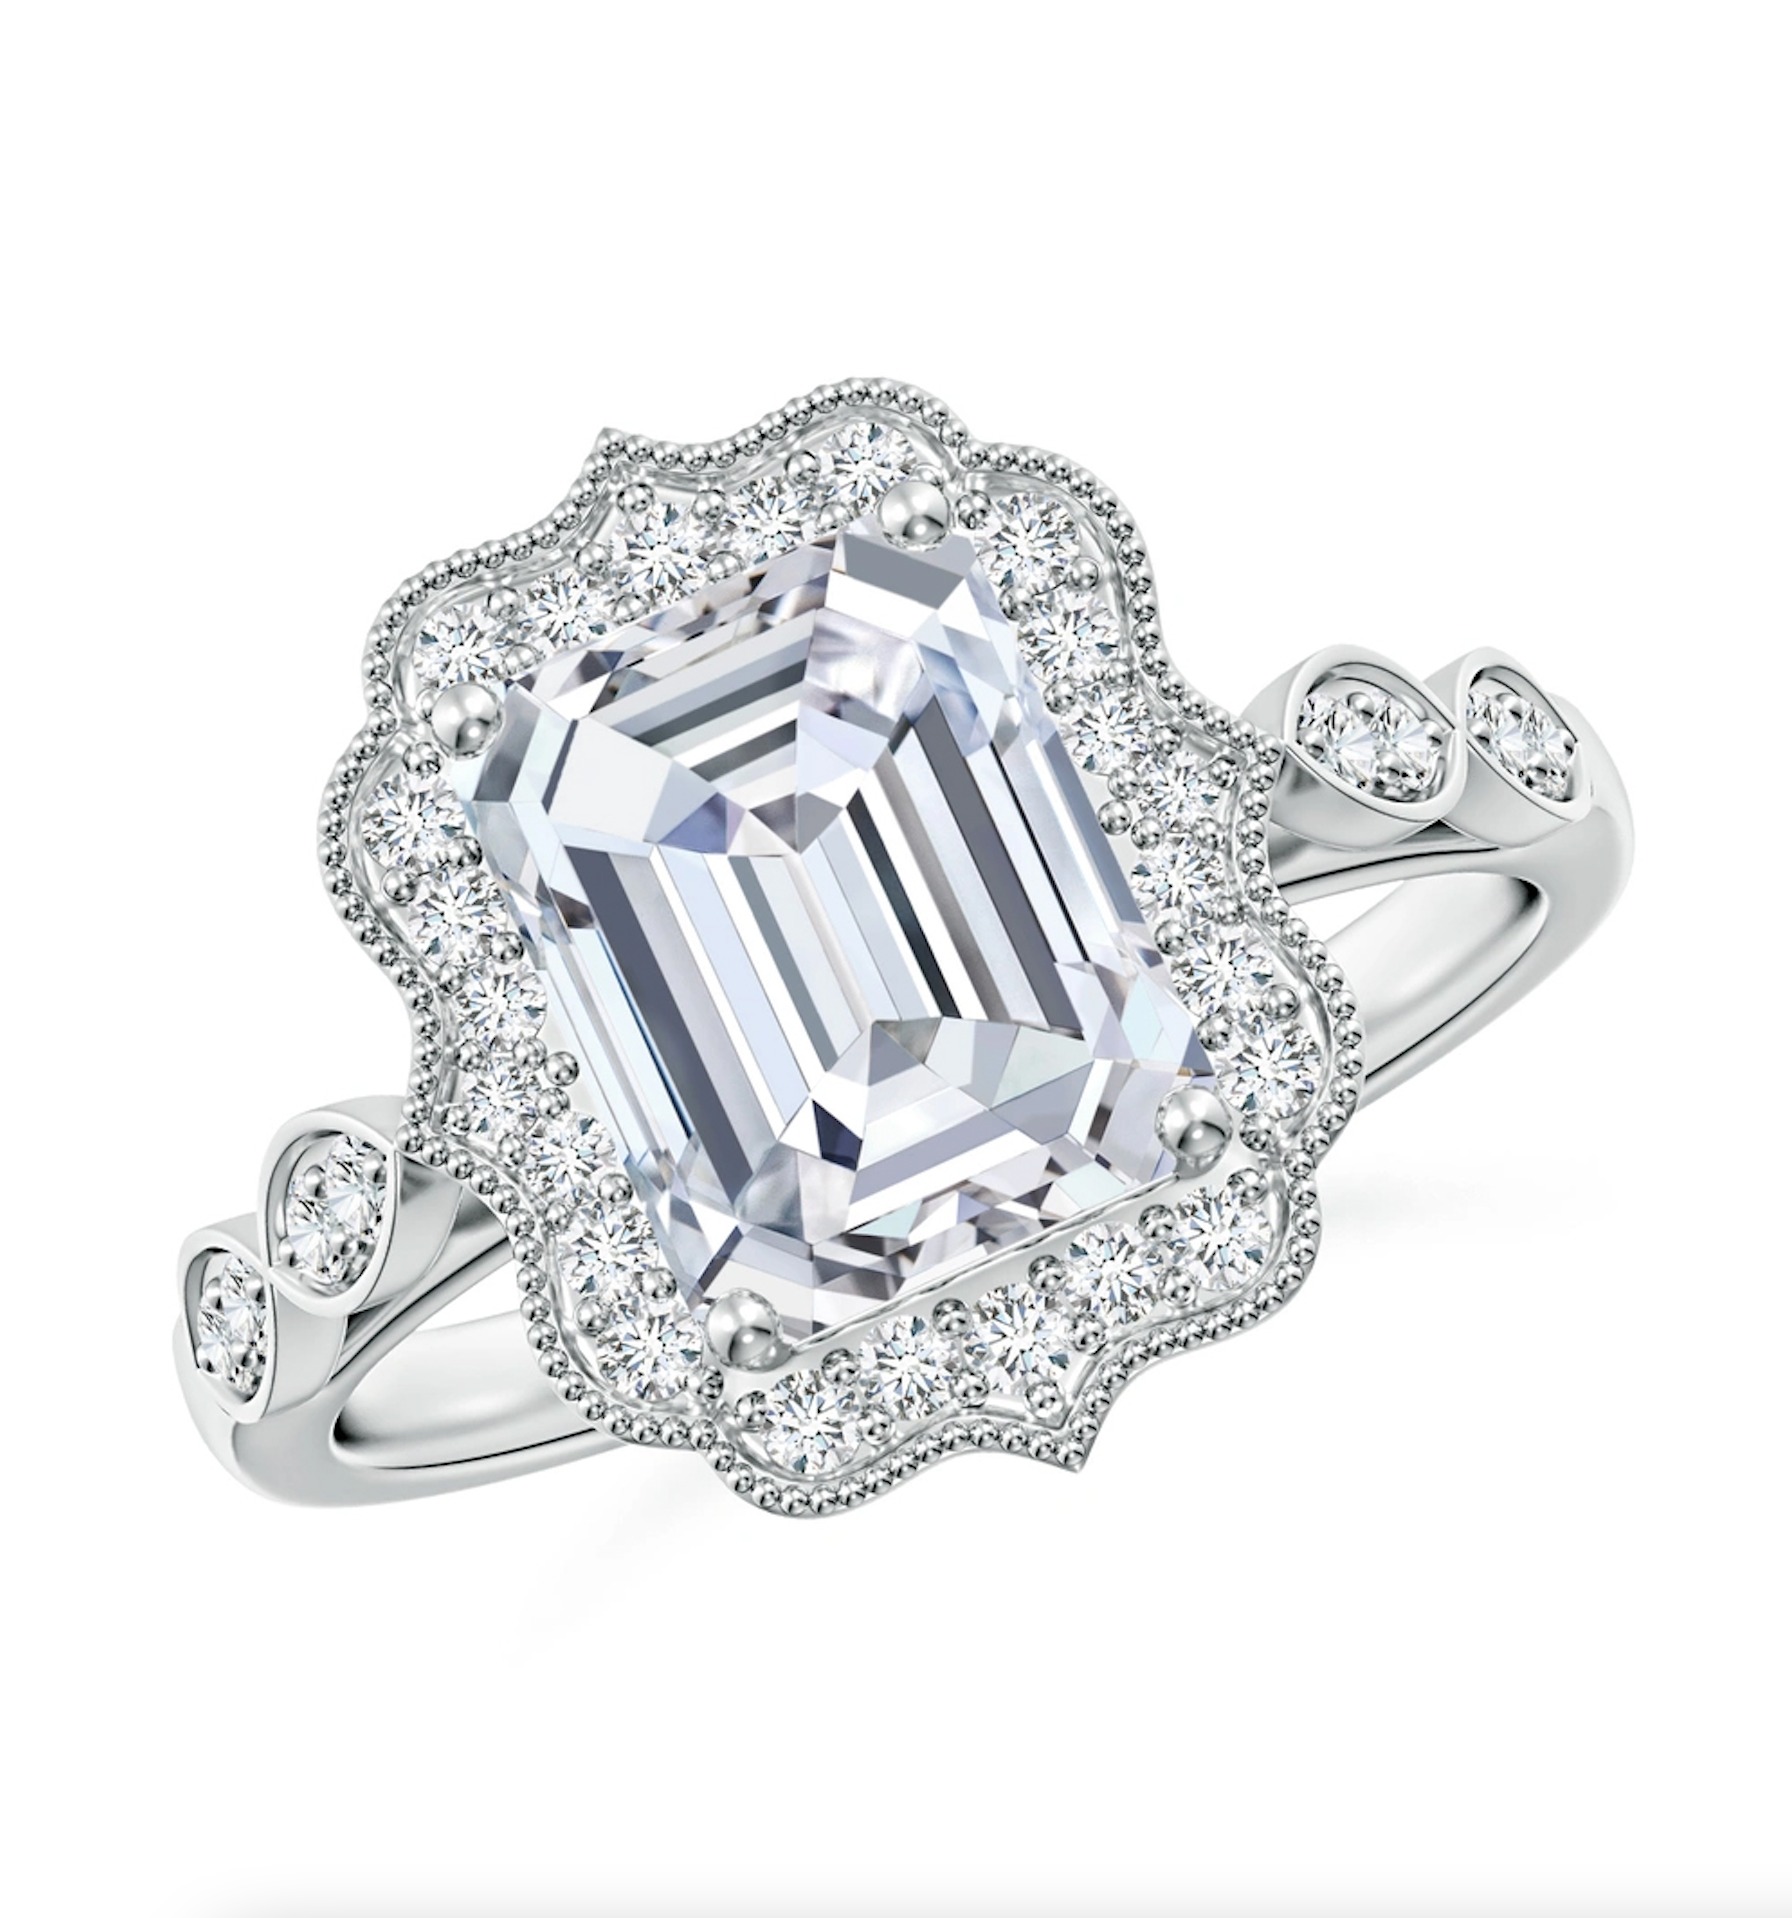 Lab-Grown Vintage Inspired Emerald-Cut Diamond Ornate Halo Engagement Ring